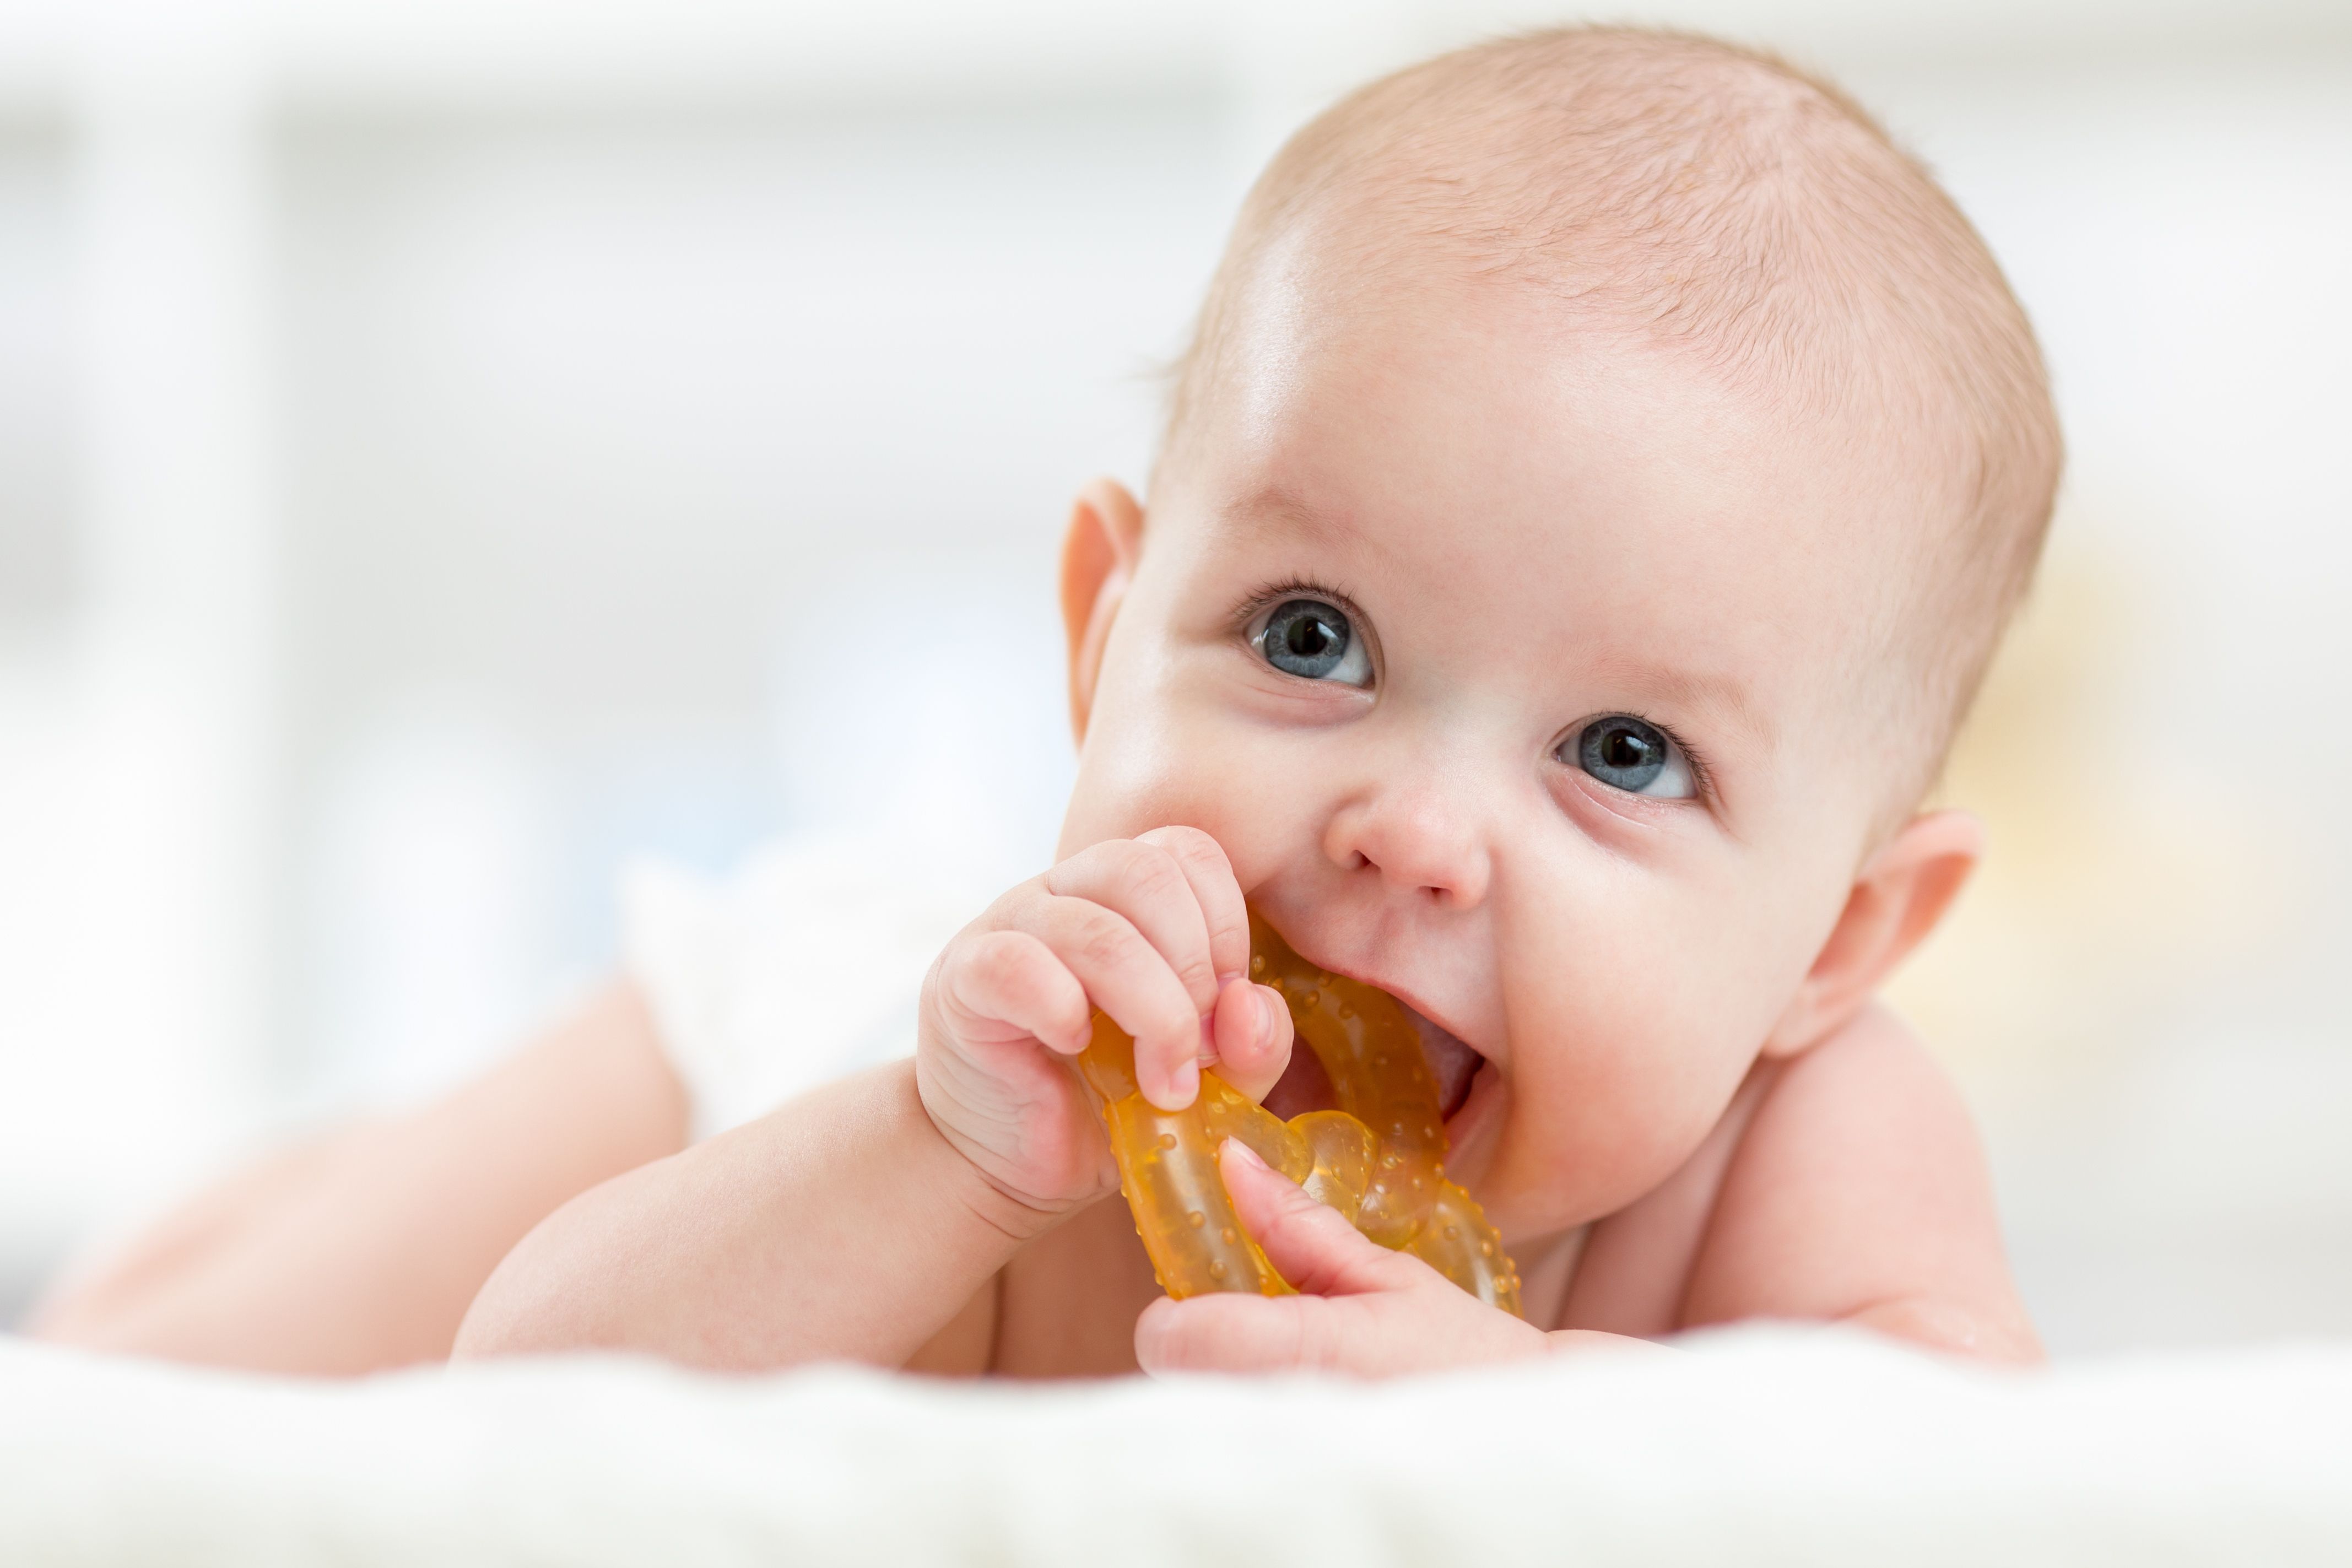 Tips for Every Parent Dealing with Teething Children